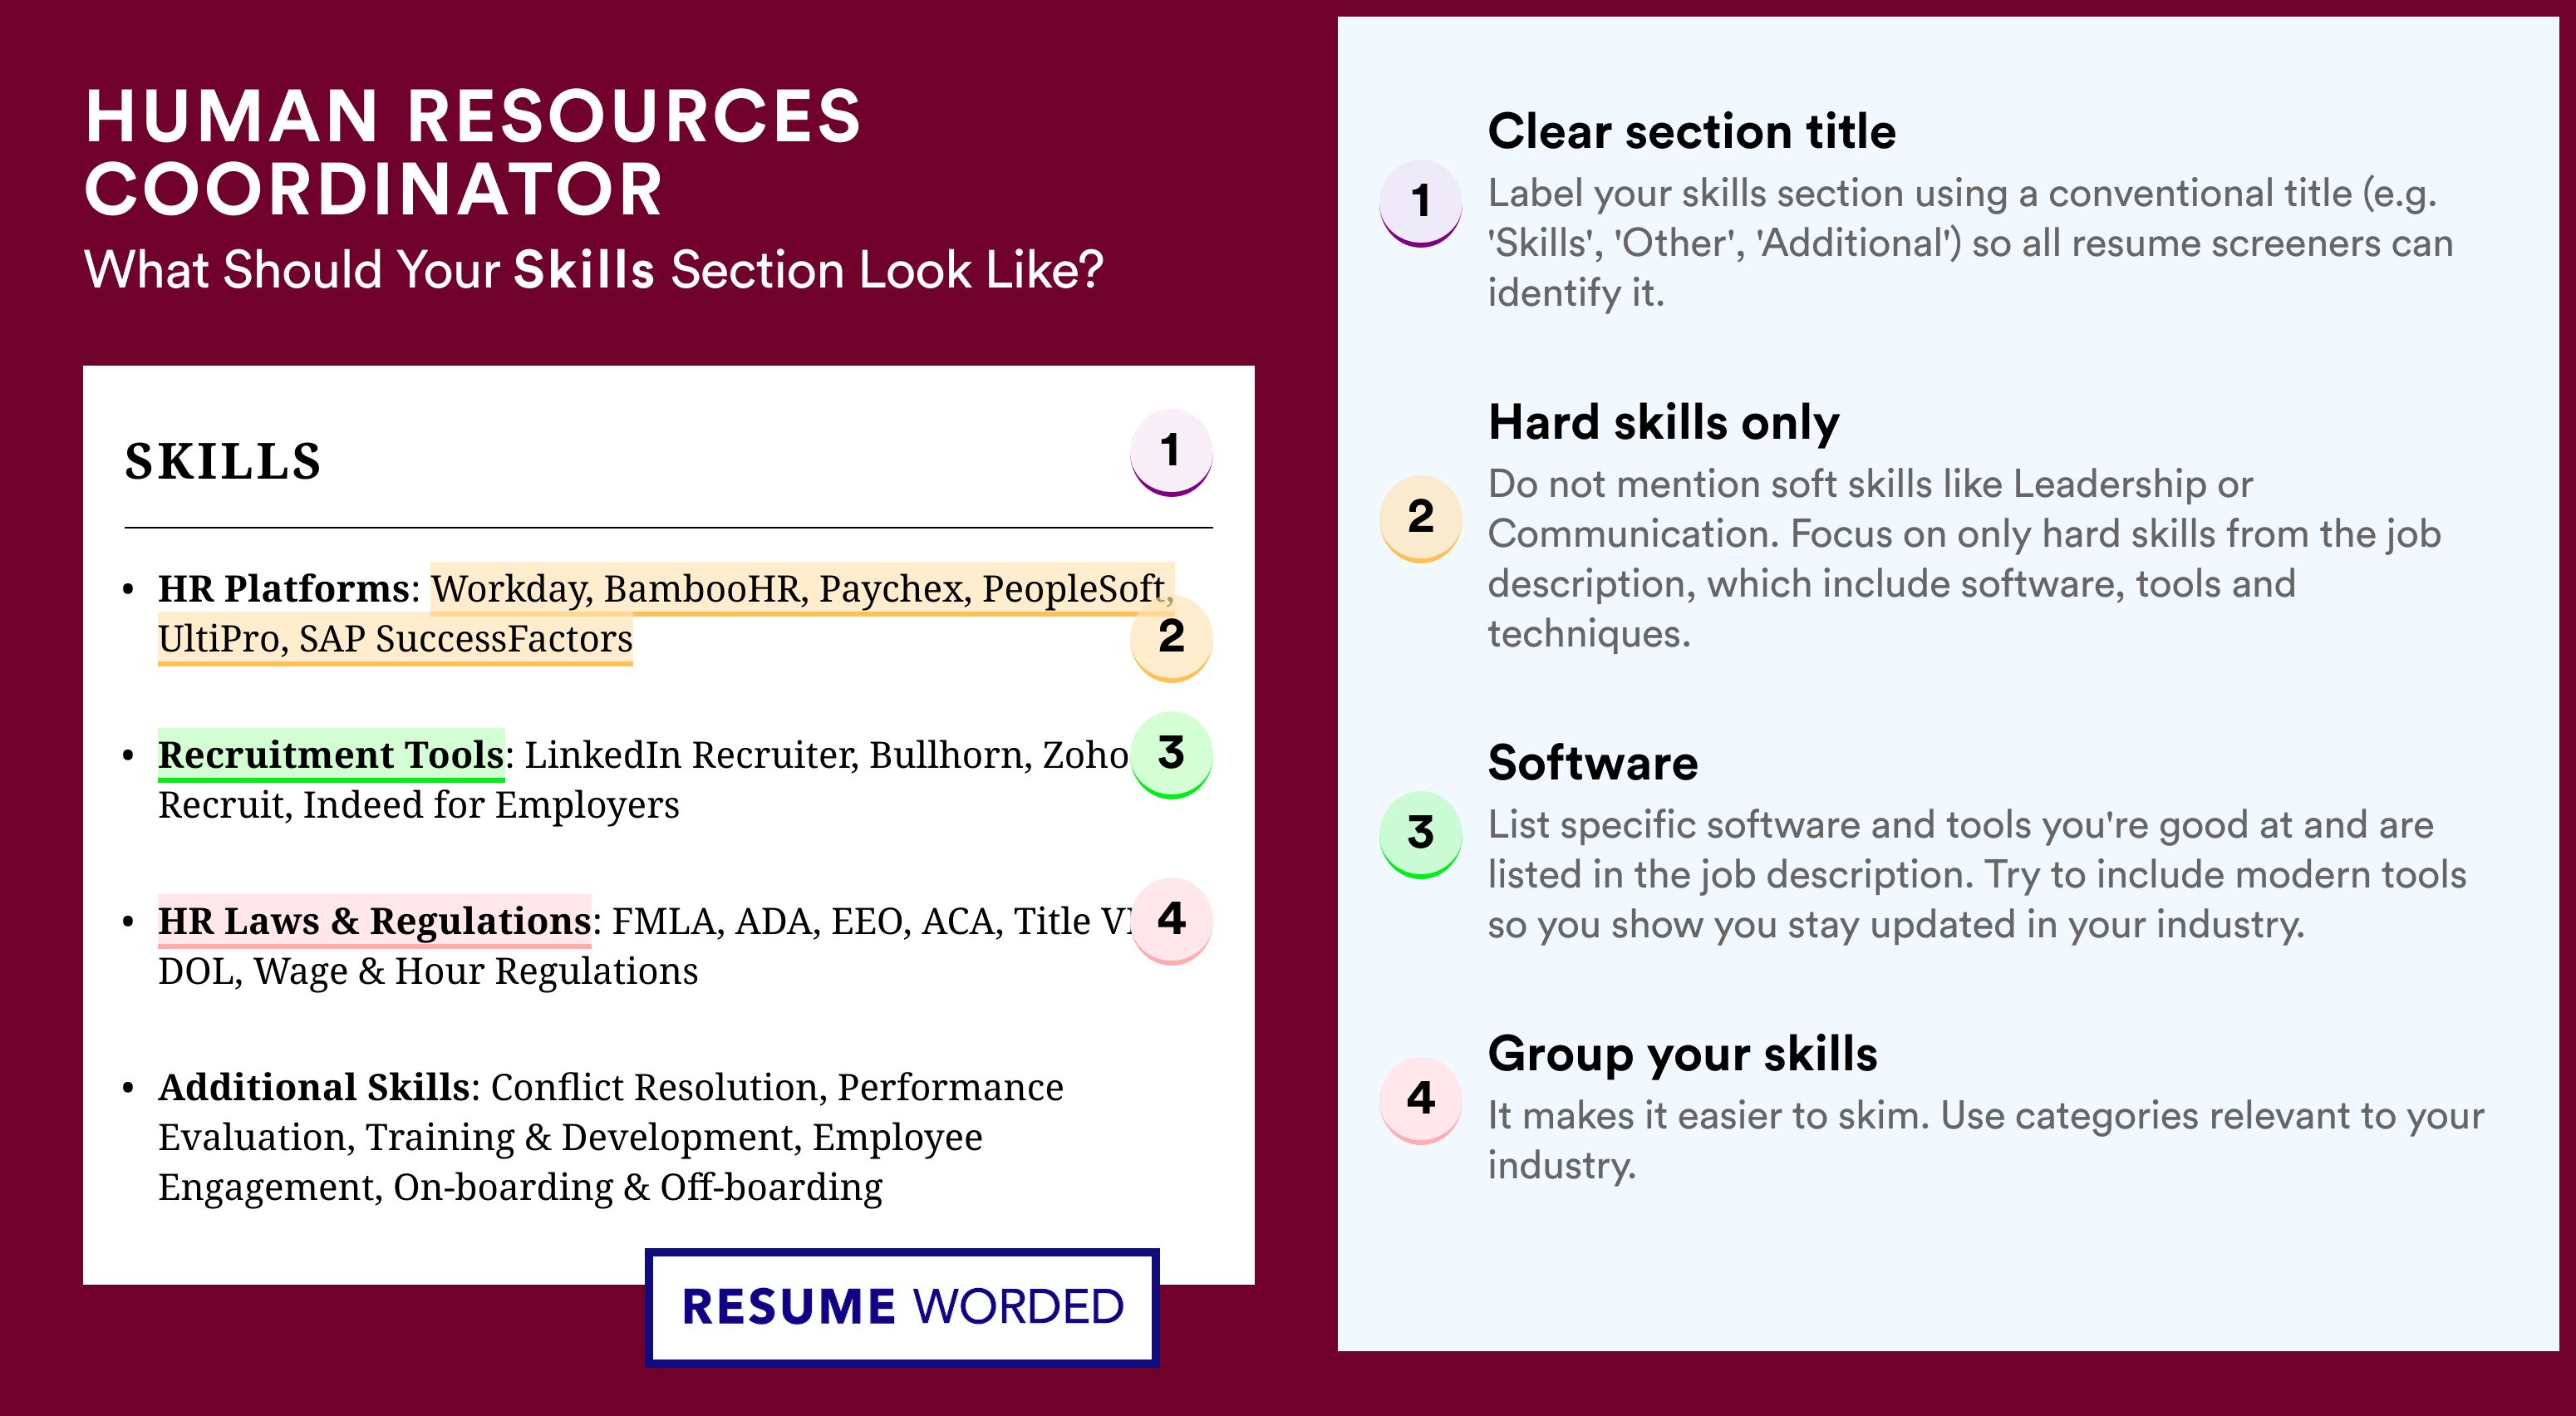 How To Write Your Skills Section - Human Resources Coordinator Roles